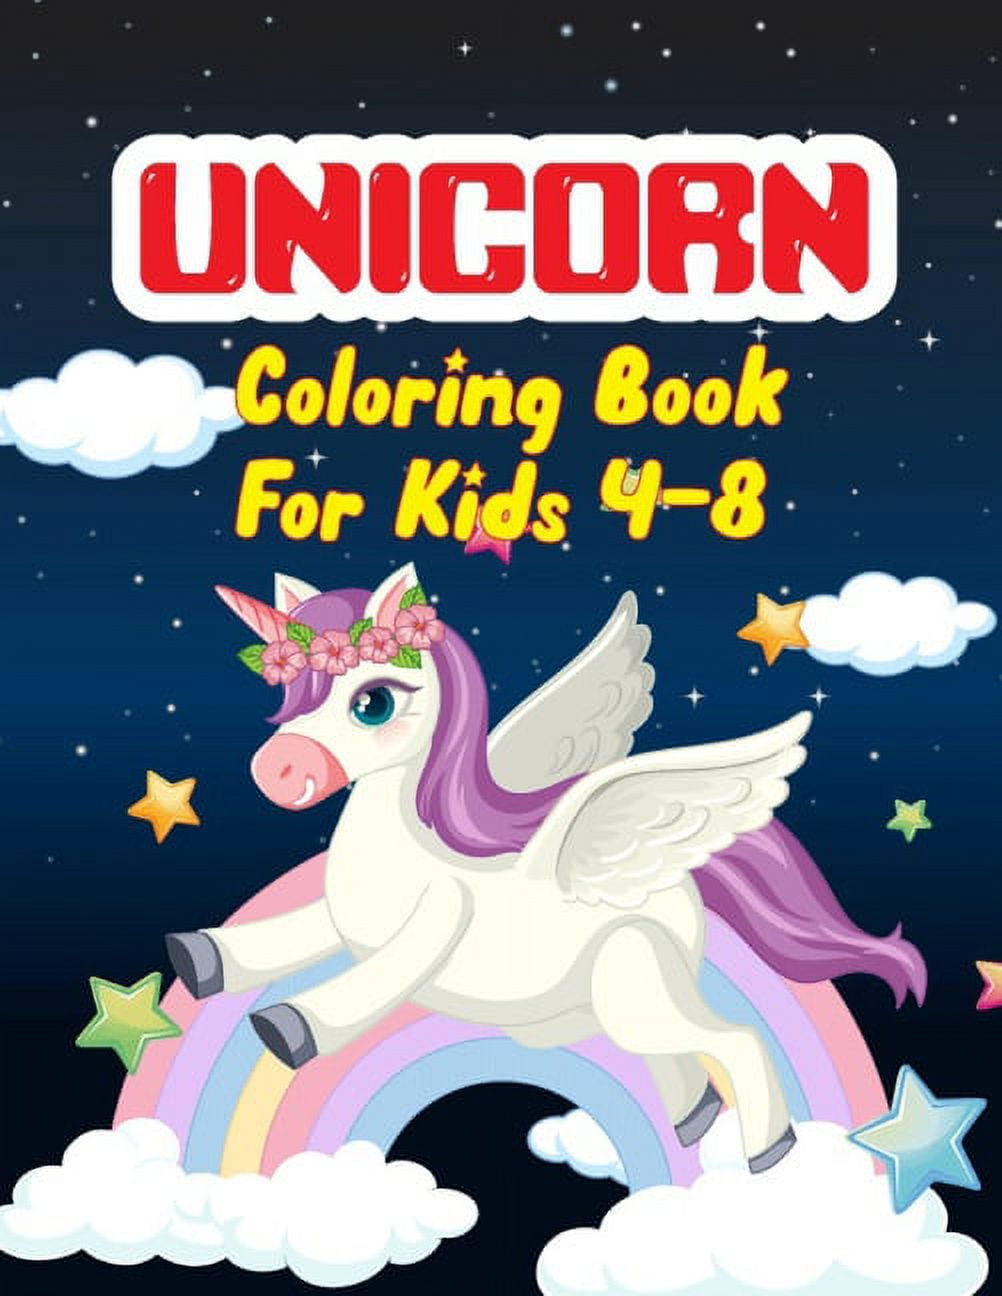 Unicorn Coloring Book For Kids Ages 4-8: Arts & Crafts Kit for Kids, Girls,  and Boys - Perfect for Toddlers as a Quiet Time Project or Indoor Family A  a book by